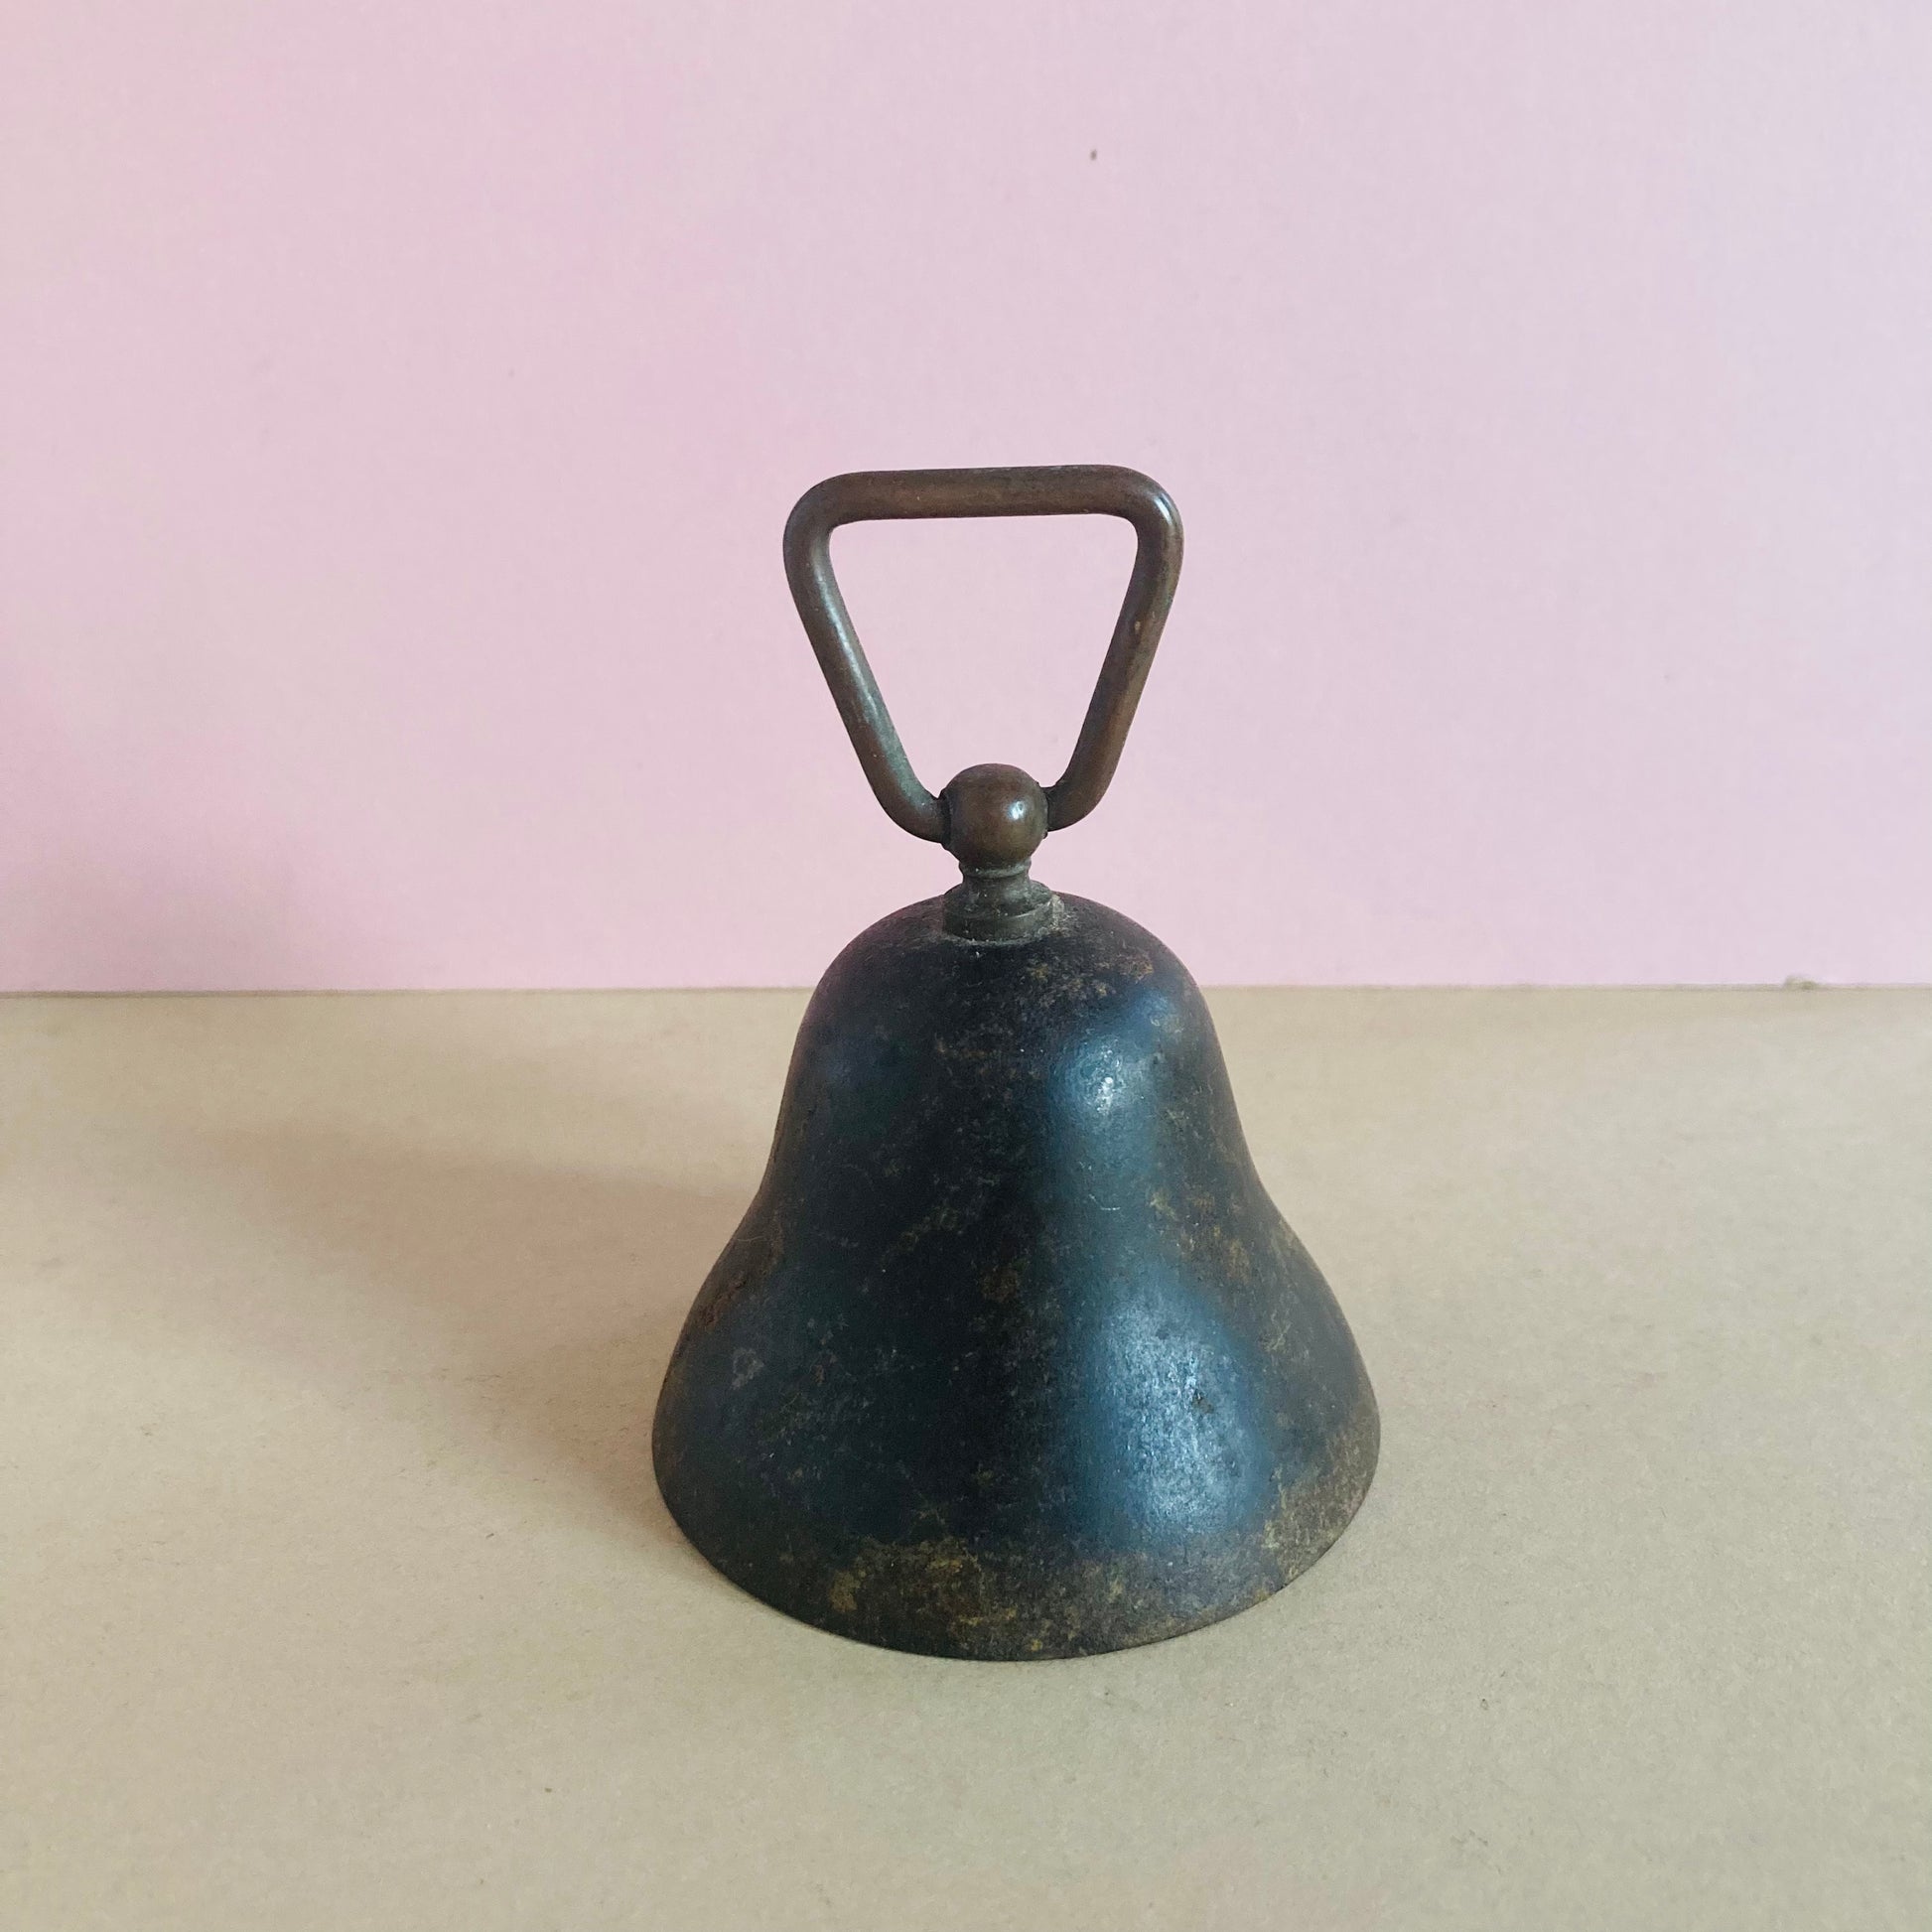 Antique Bell Beautiful Patina and Sound